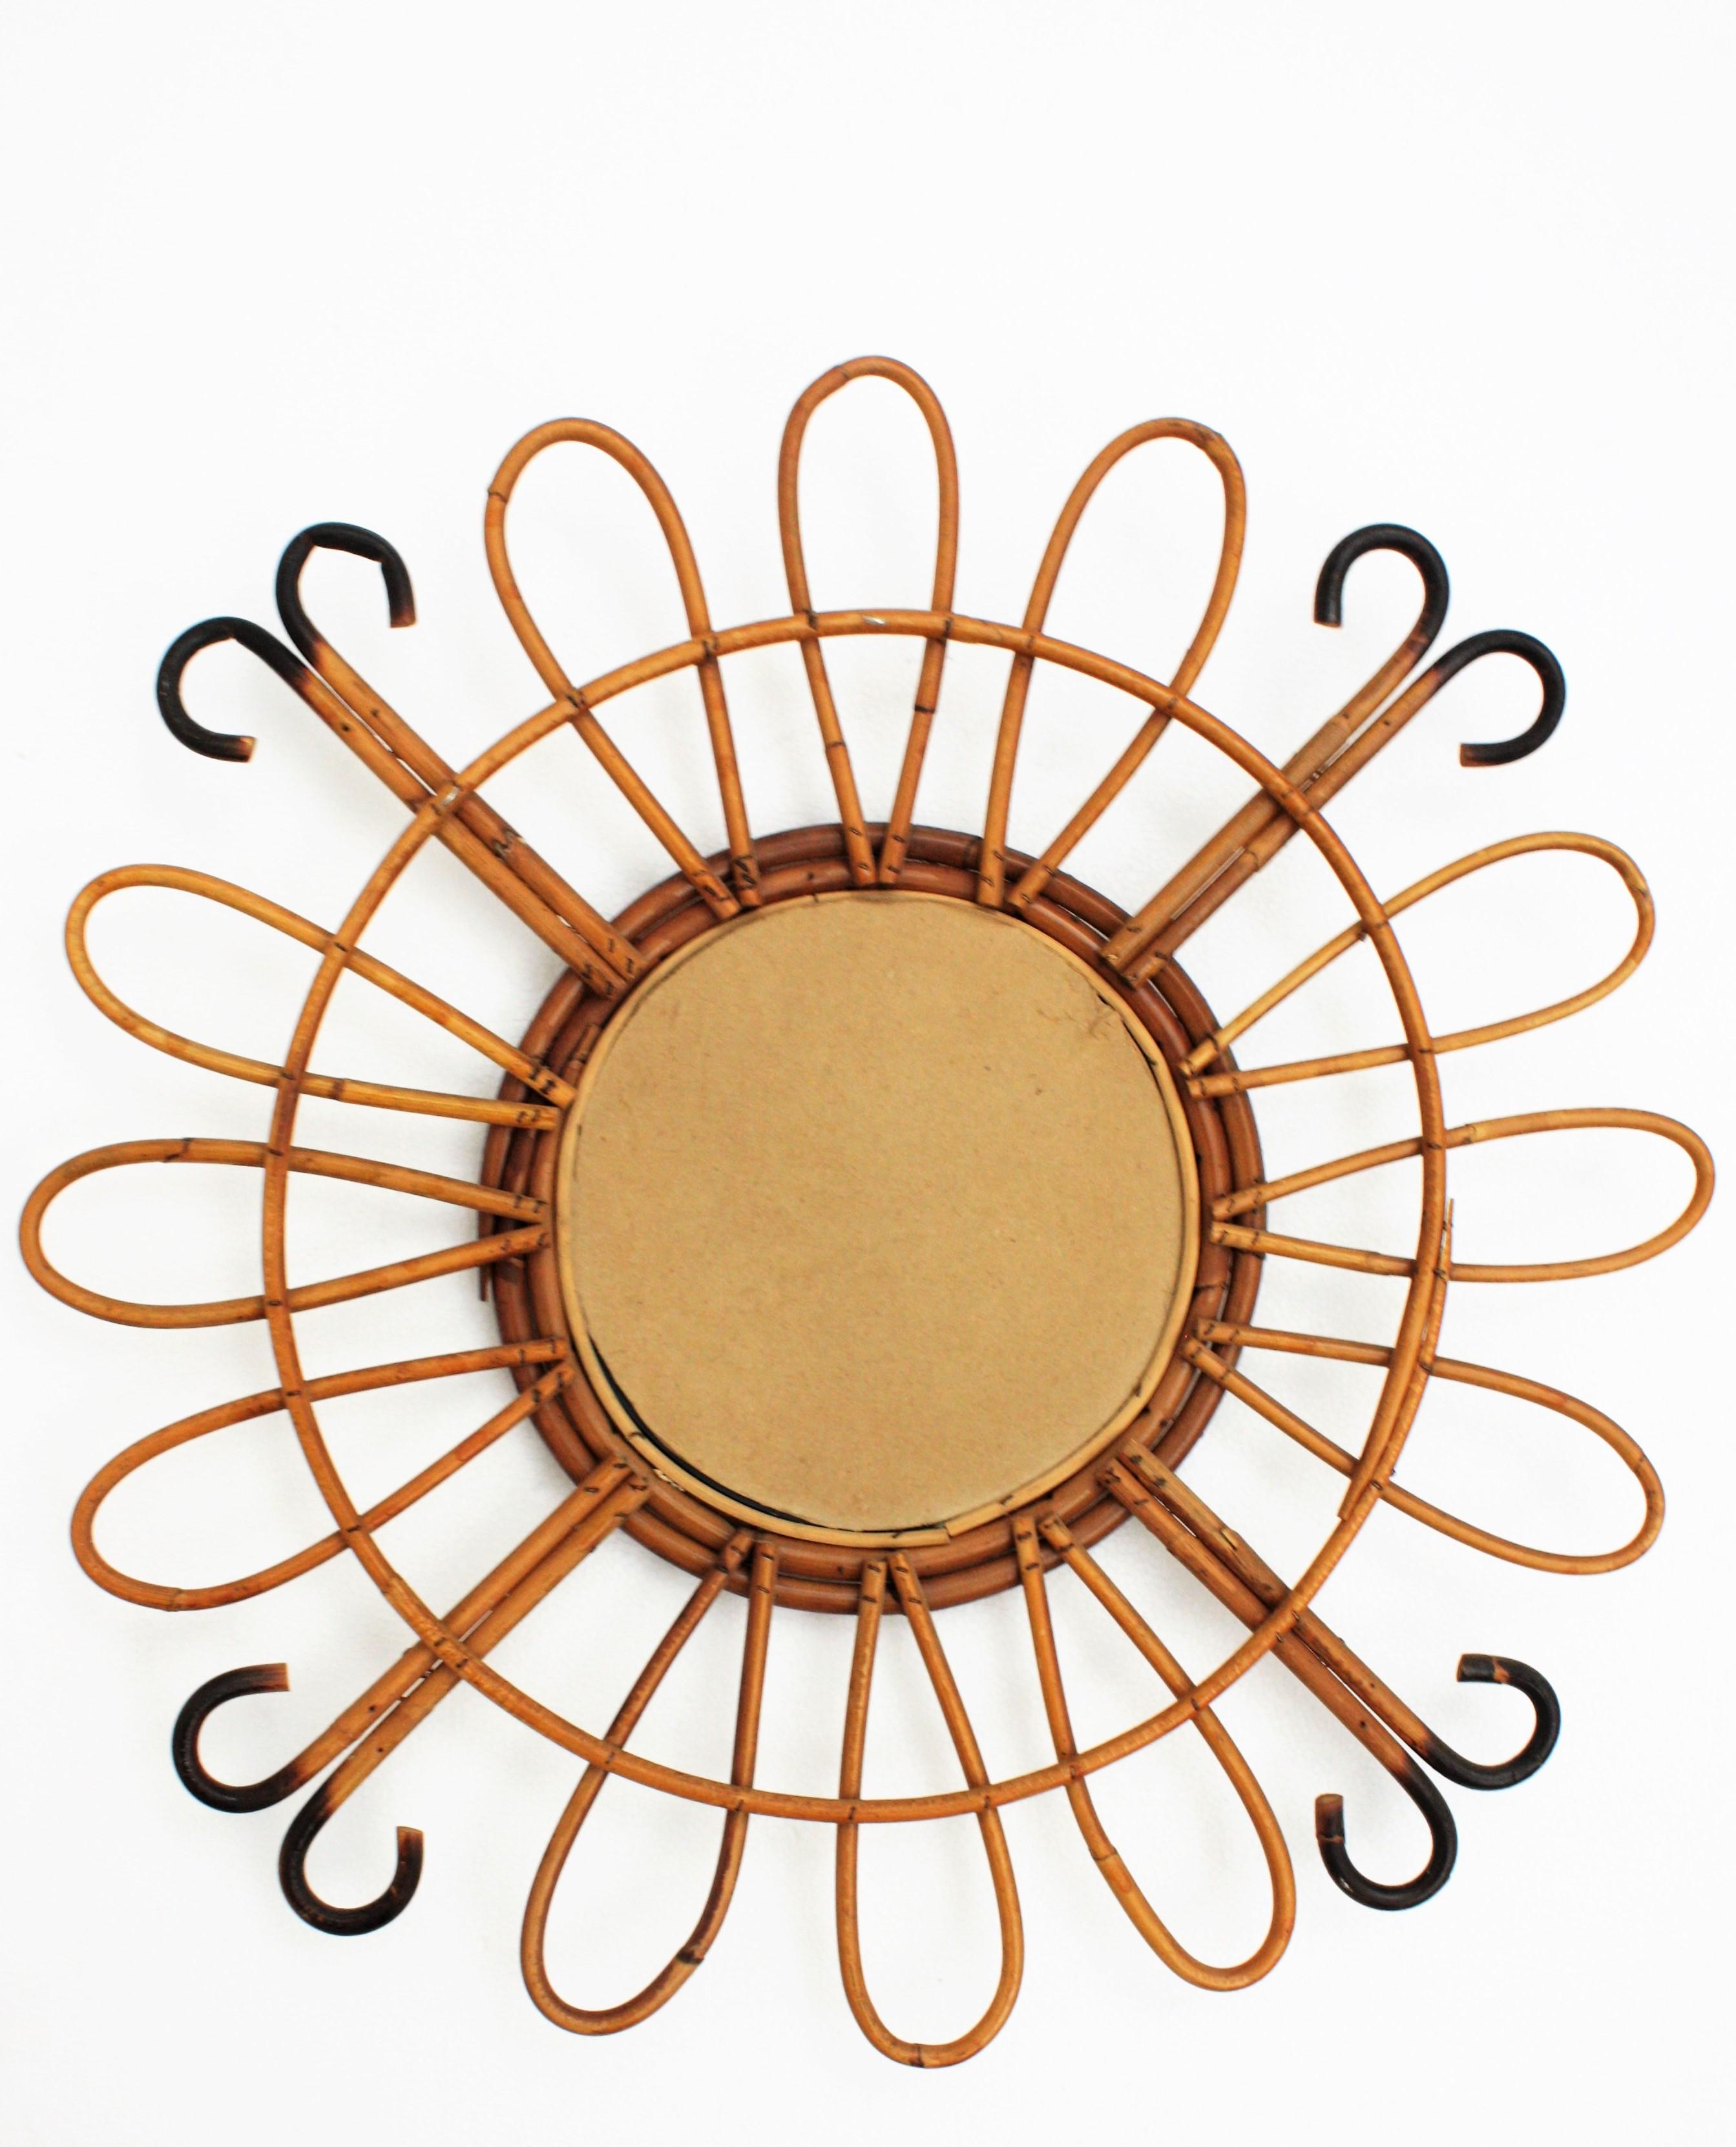 1950s Midcentury French Riviera Handcrafted Rattan and Bamboo Sunburst Mirror 10